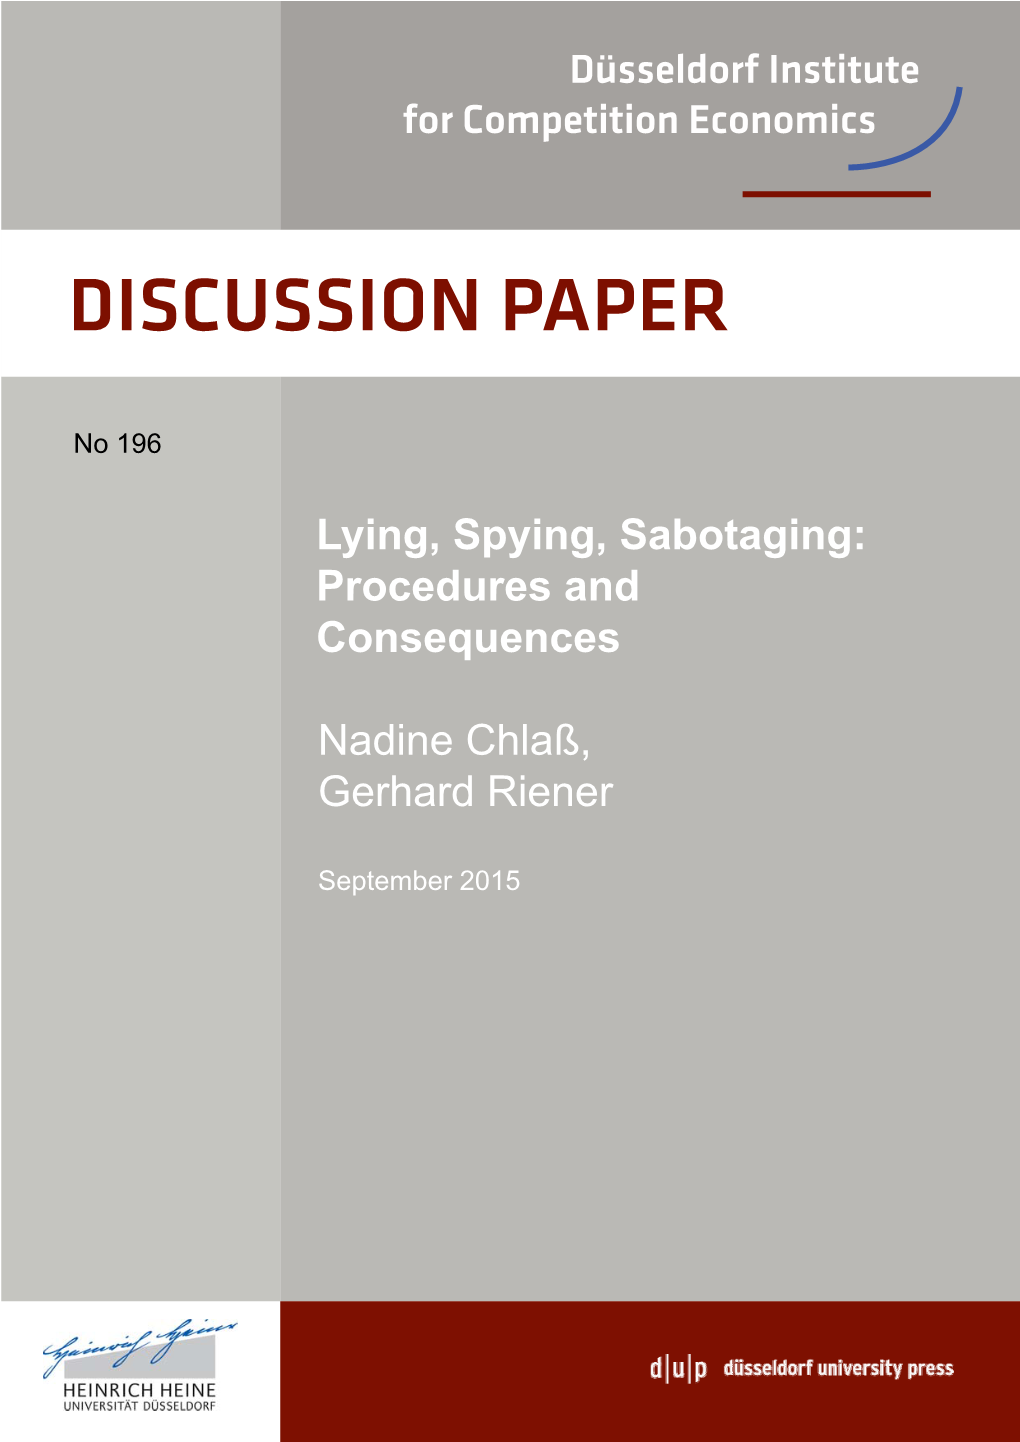 Lying, Spying, Sabotaging: Procedures and Consequences